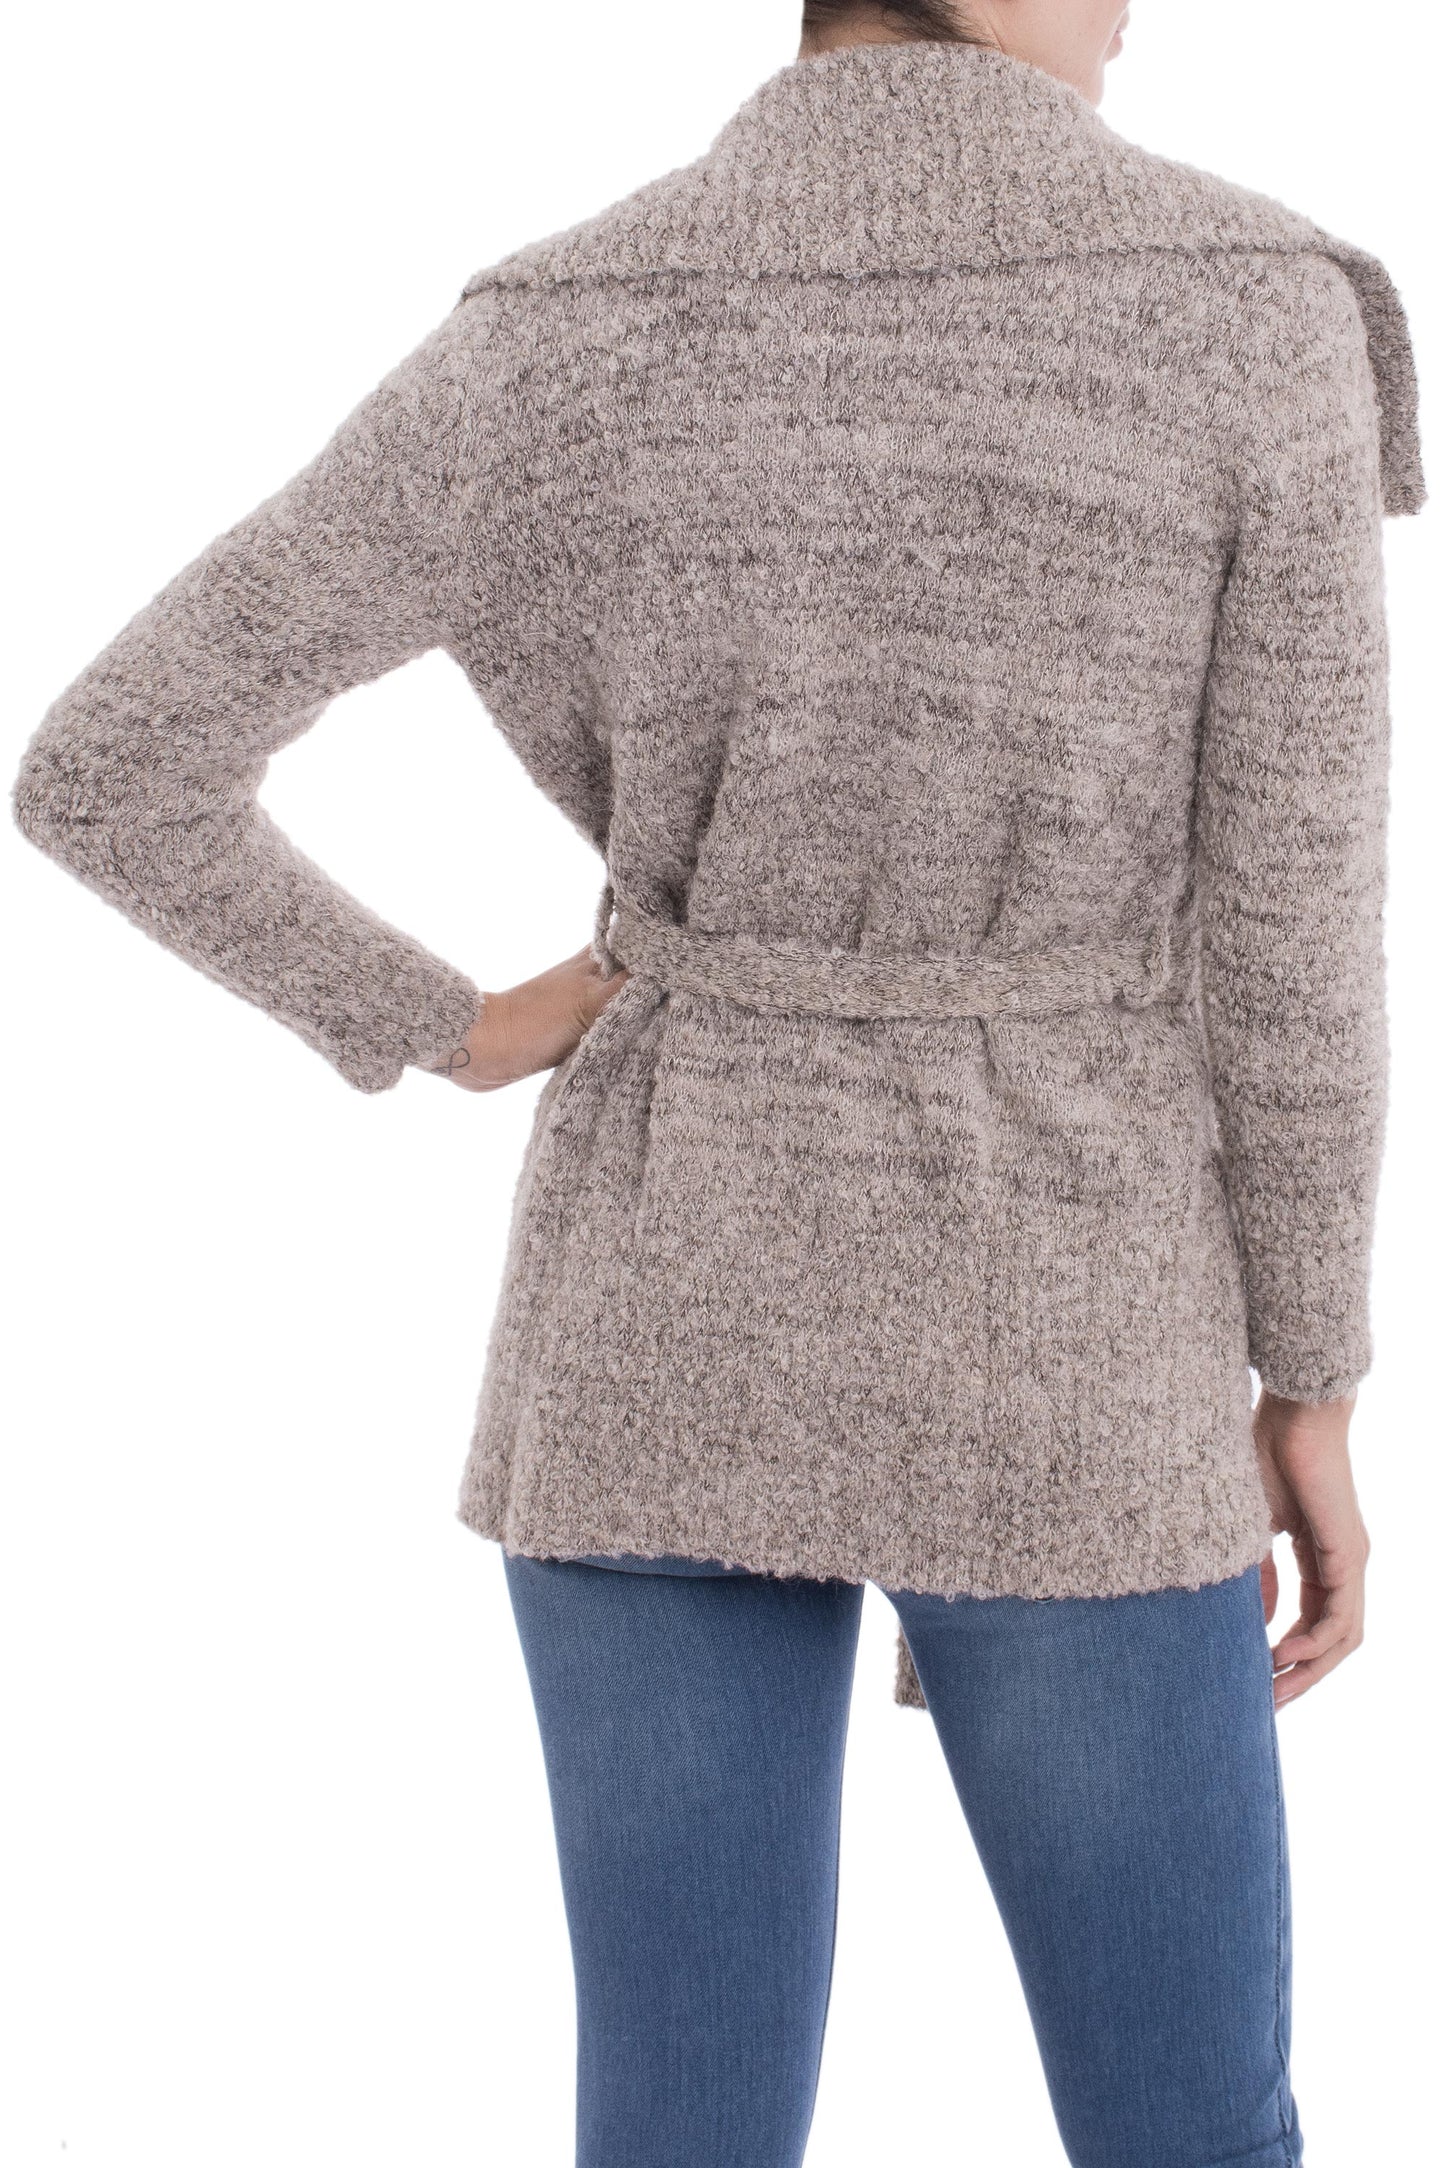 Frothed Cocoa Light Brown Alpaca Blend Long-Sleeve Buttoned Sweater Jacket